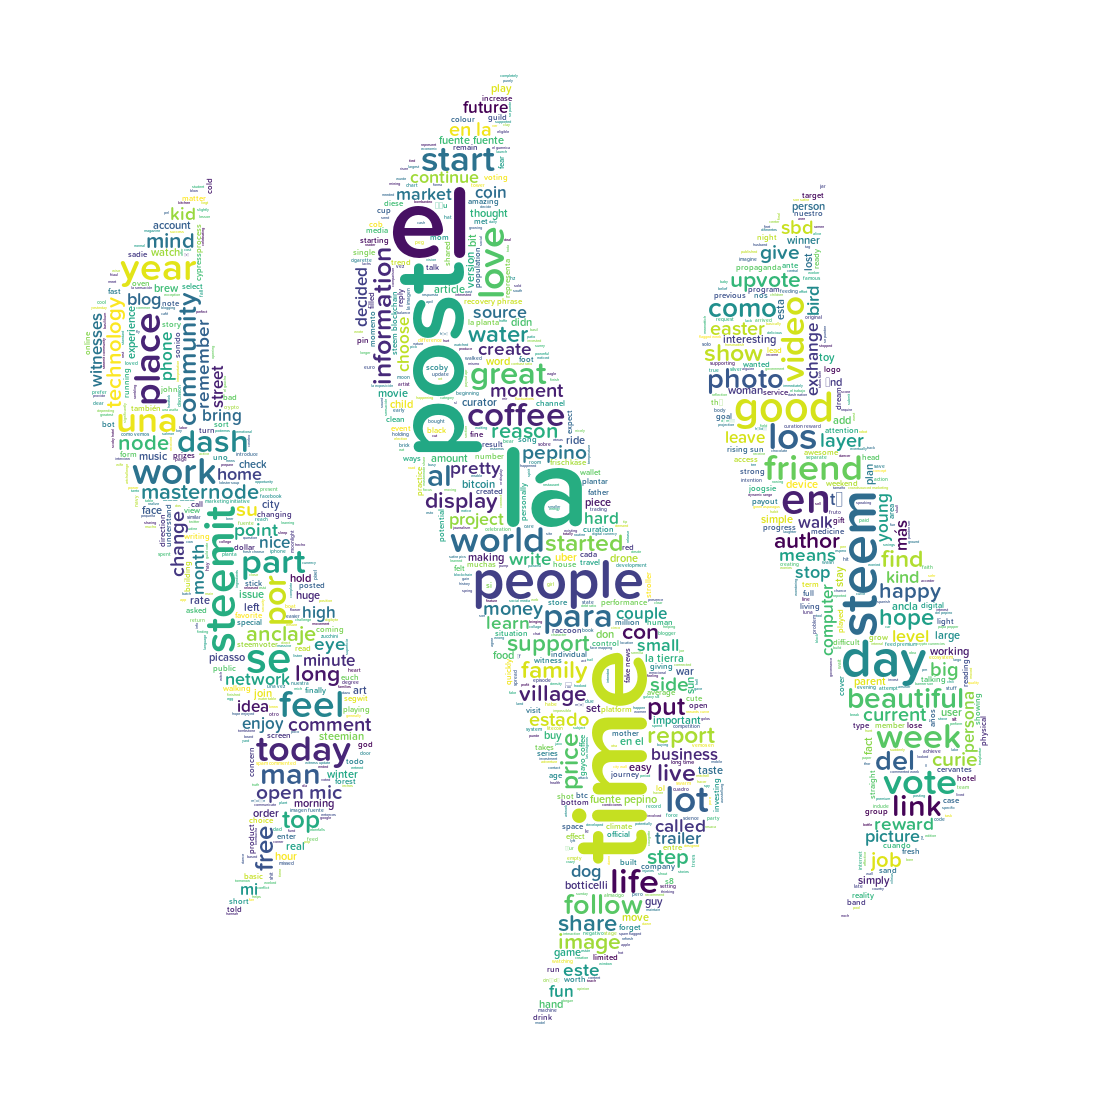 Steemit word cloud for April 17, 2017